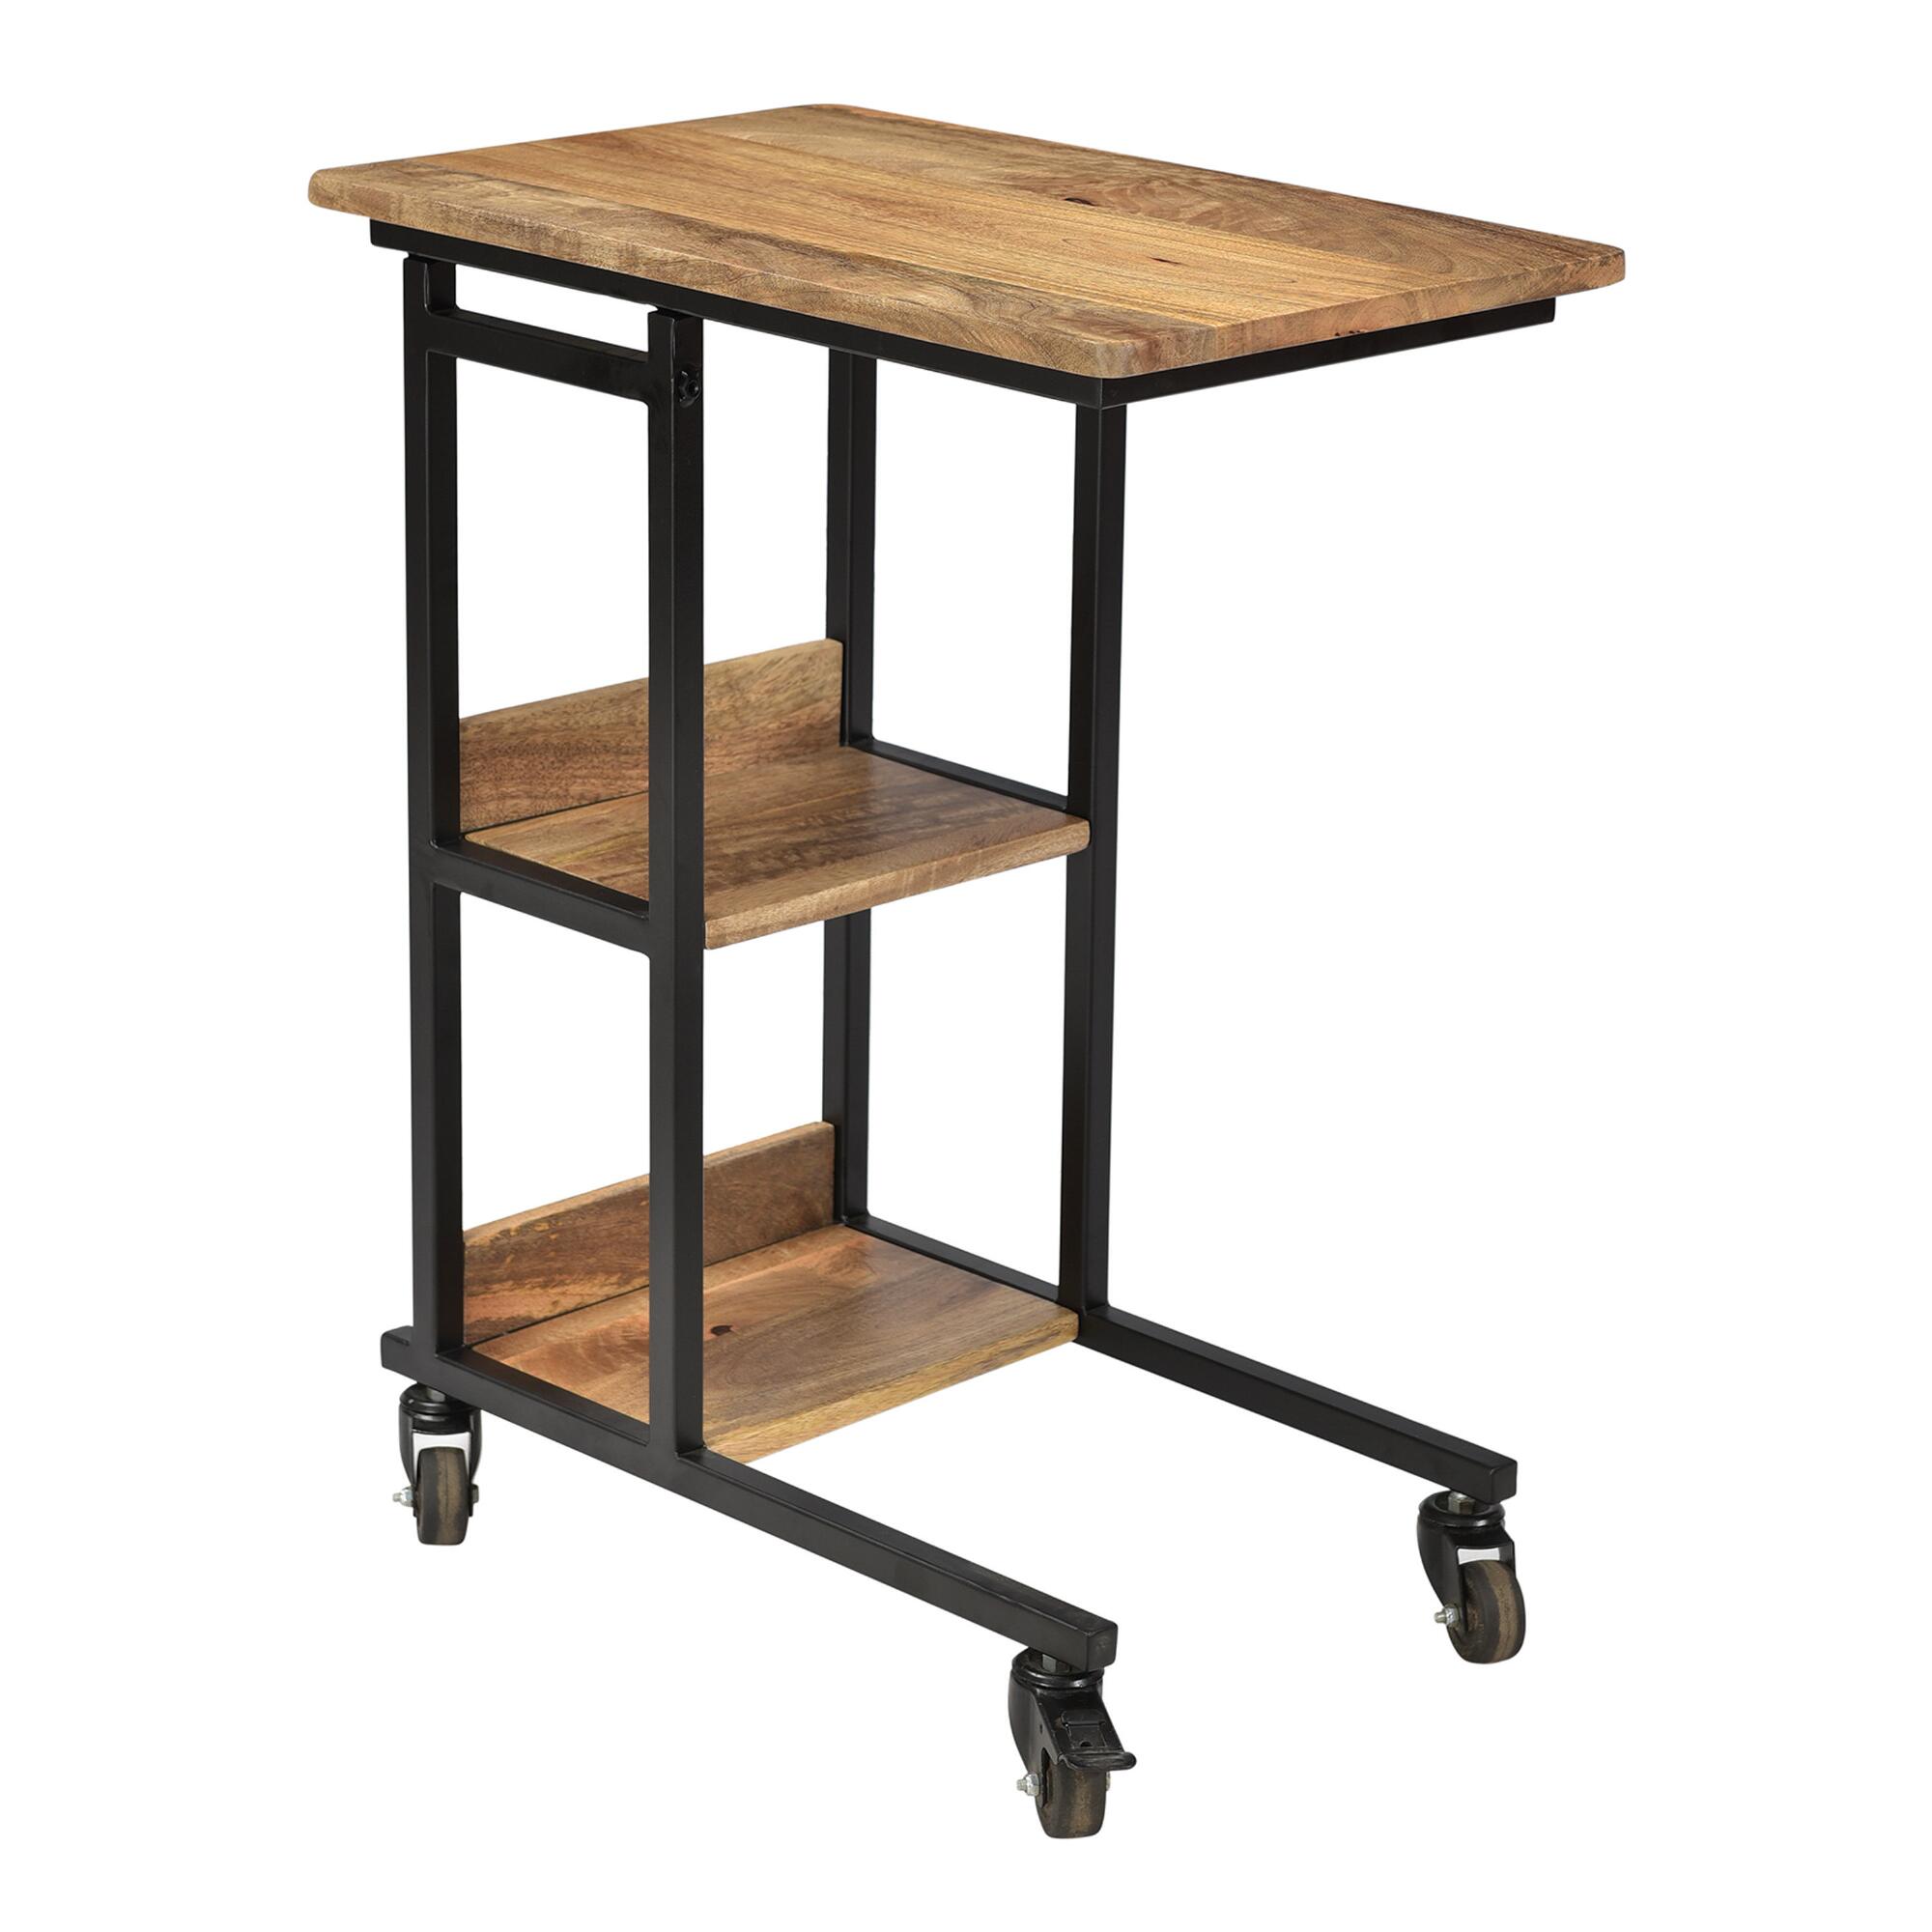 Wood And Iron Hays Rolling Desk With Shelves: Black/Brown by World Market